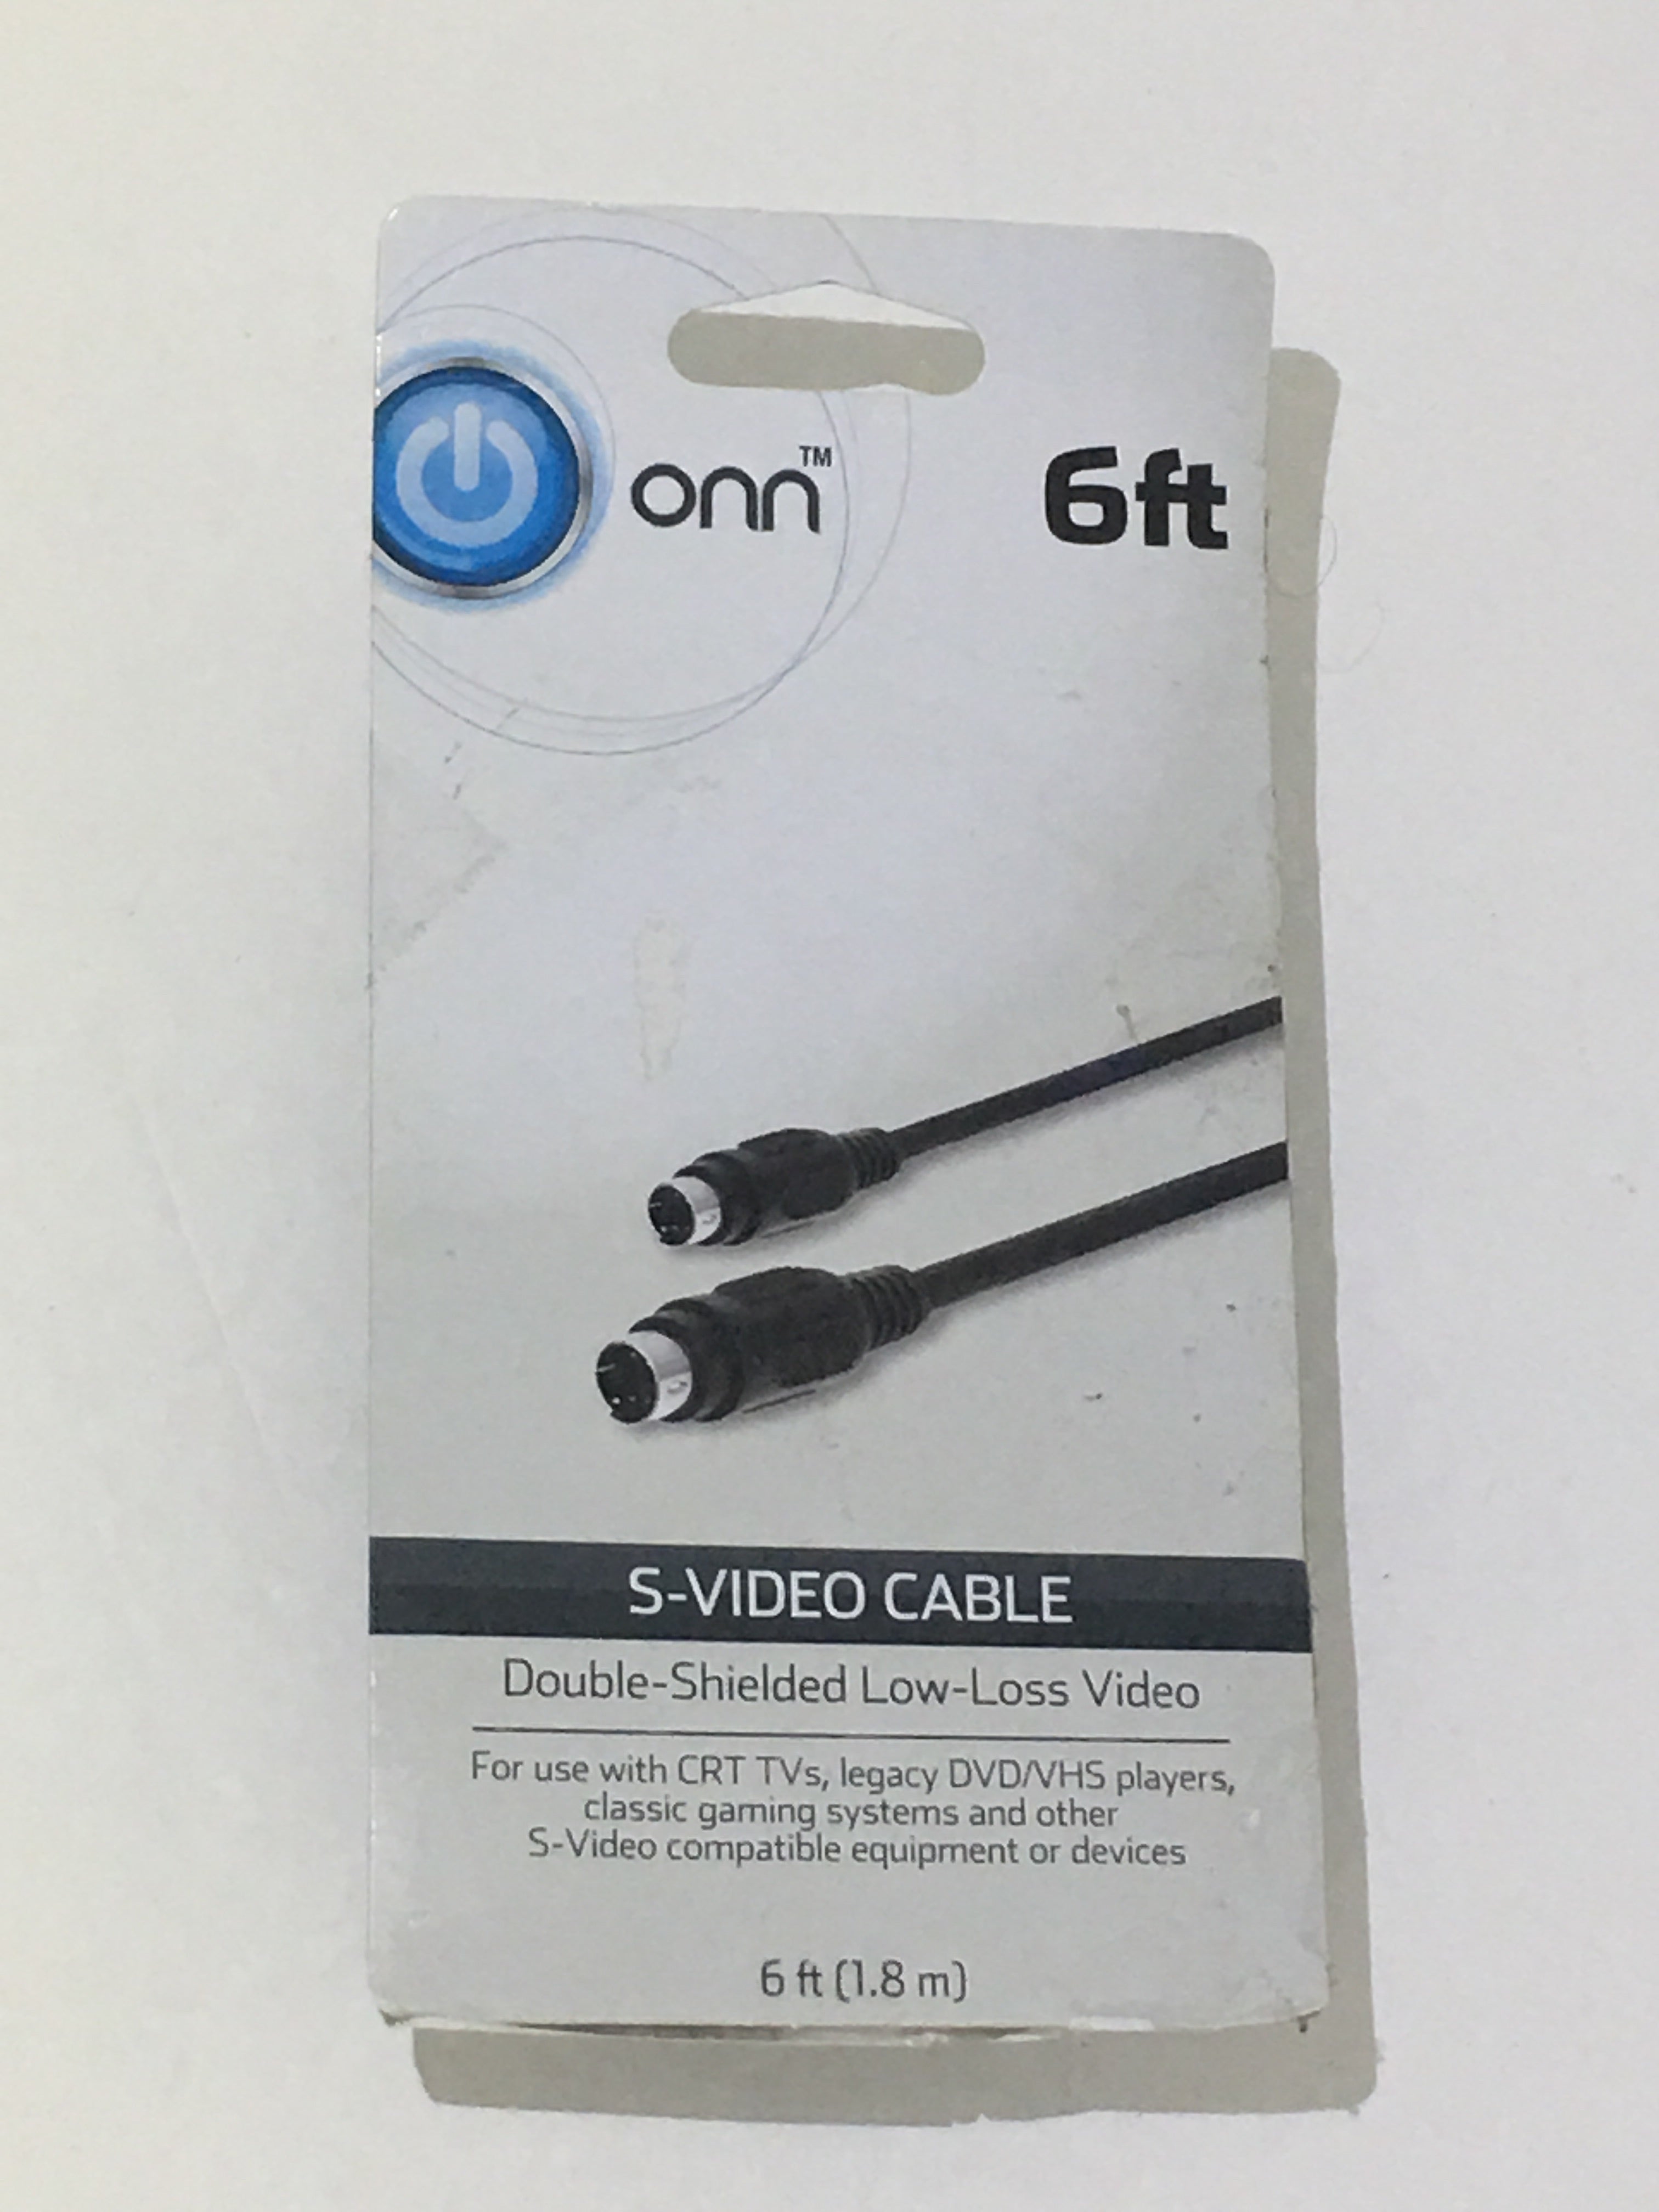 Onn S-Video Cable 6ft CRT TV DVD/VHS Players Classic Gaming Systems Equipment Devices